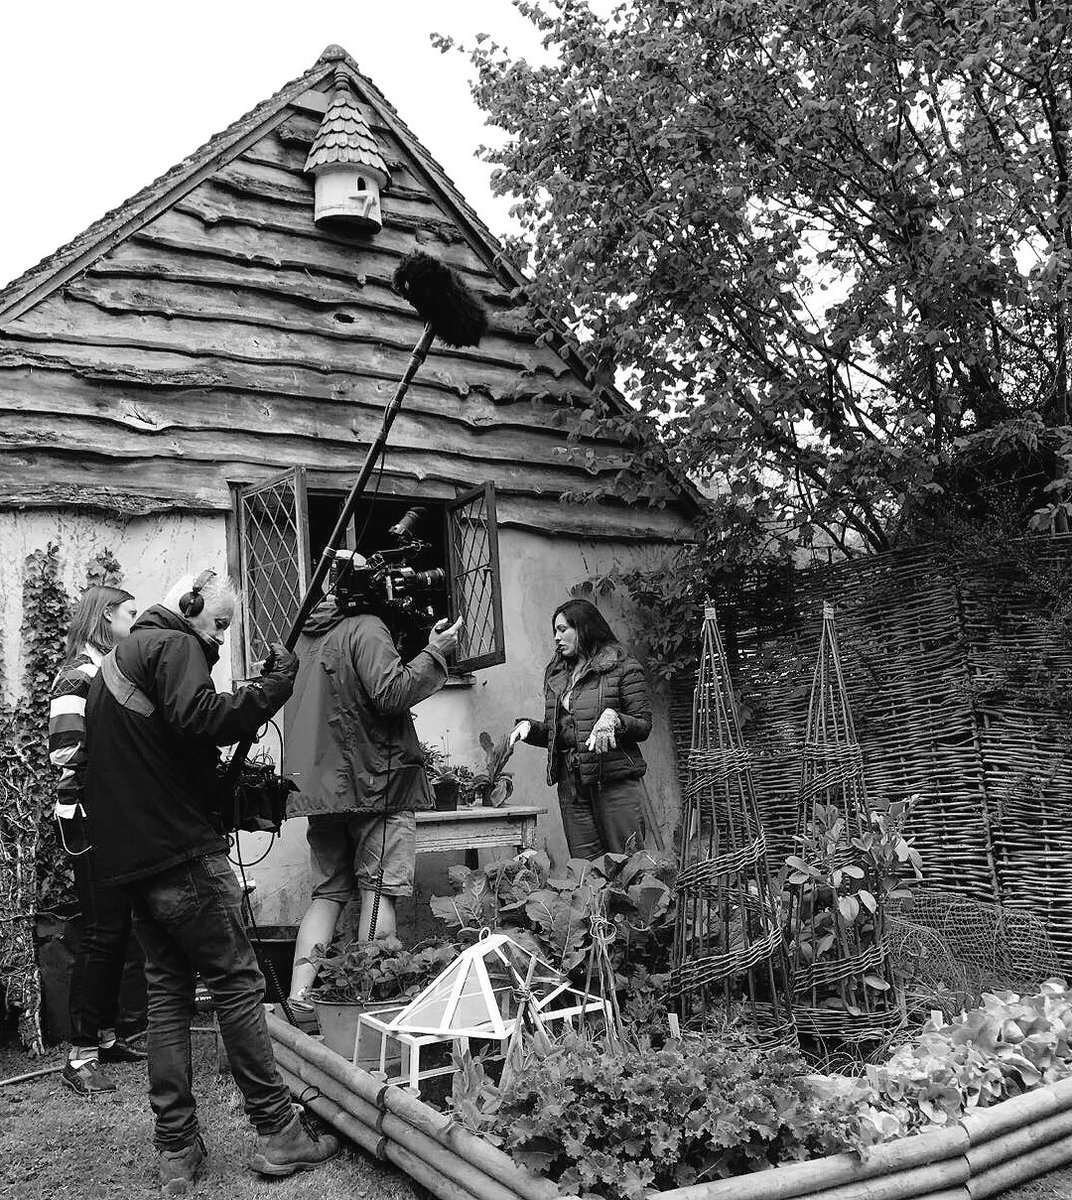 Filming Today in my Potting Shed and Veg Patch @GWandShows ????????‍???? https://t.co/g8OMtRhQ2d